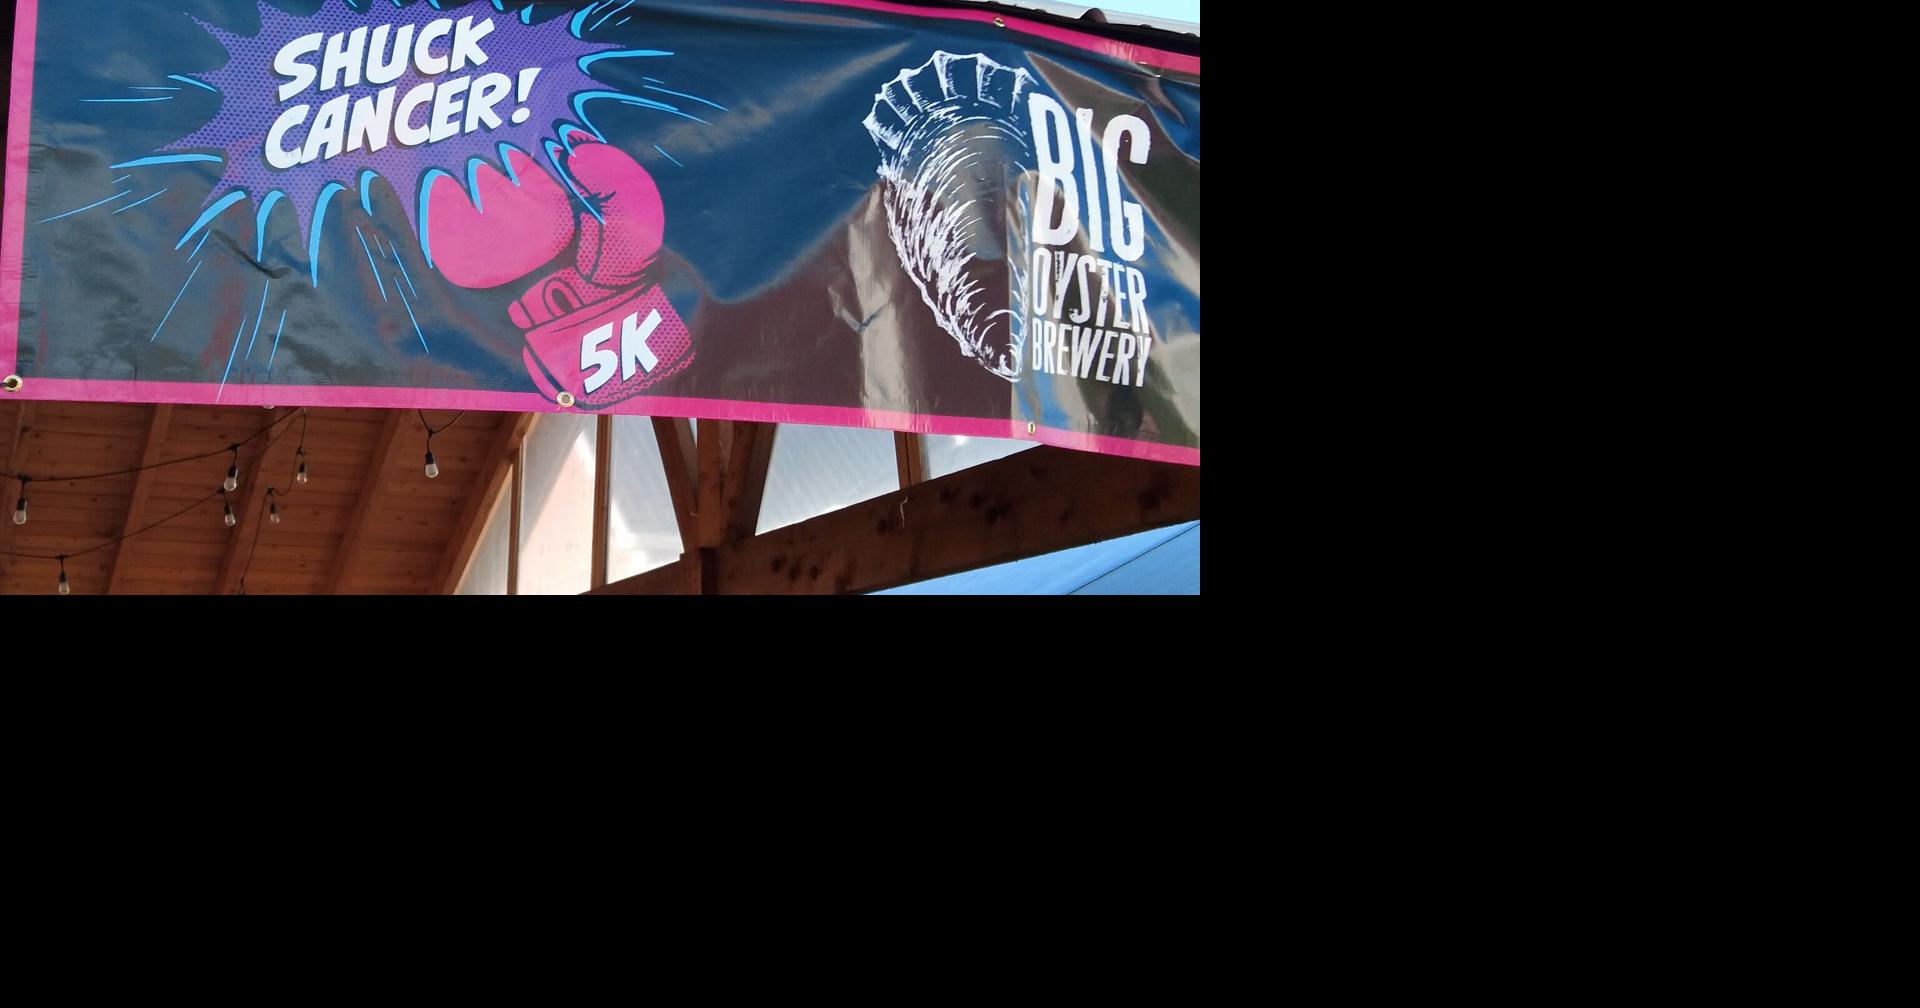 Breast cancer fundraiser, 5K planned in Mt. Pleasant